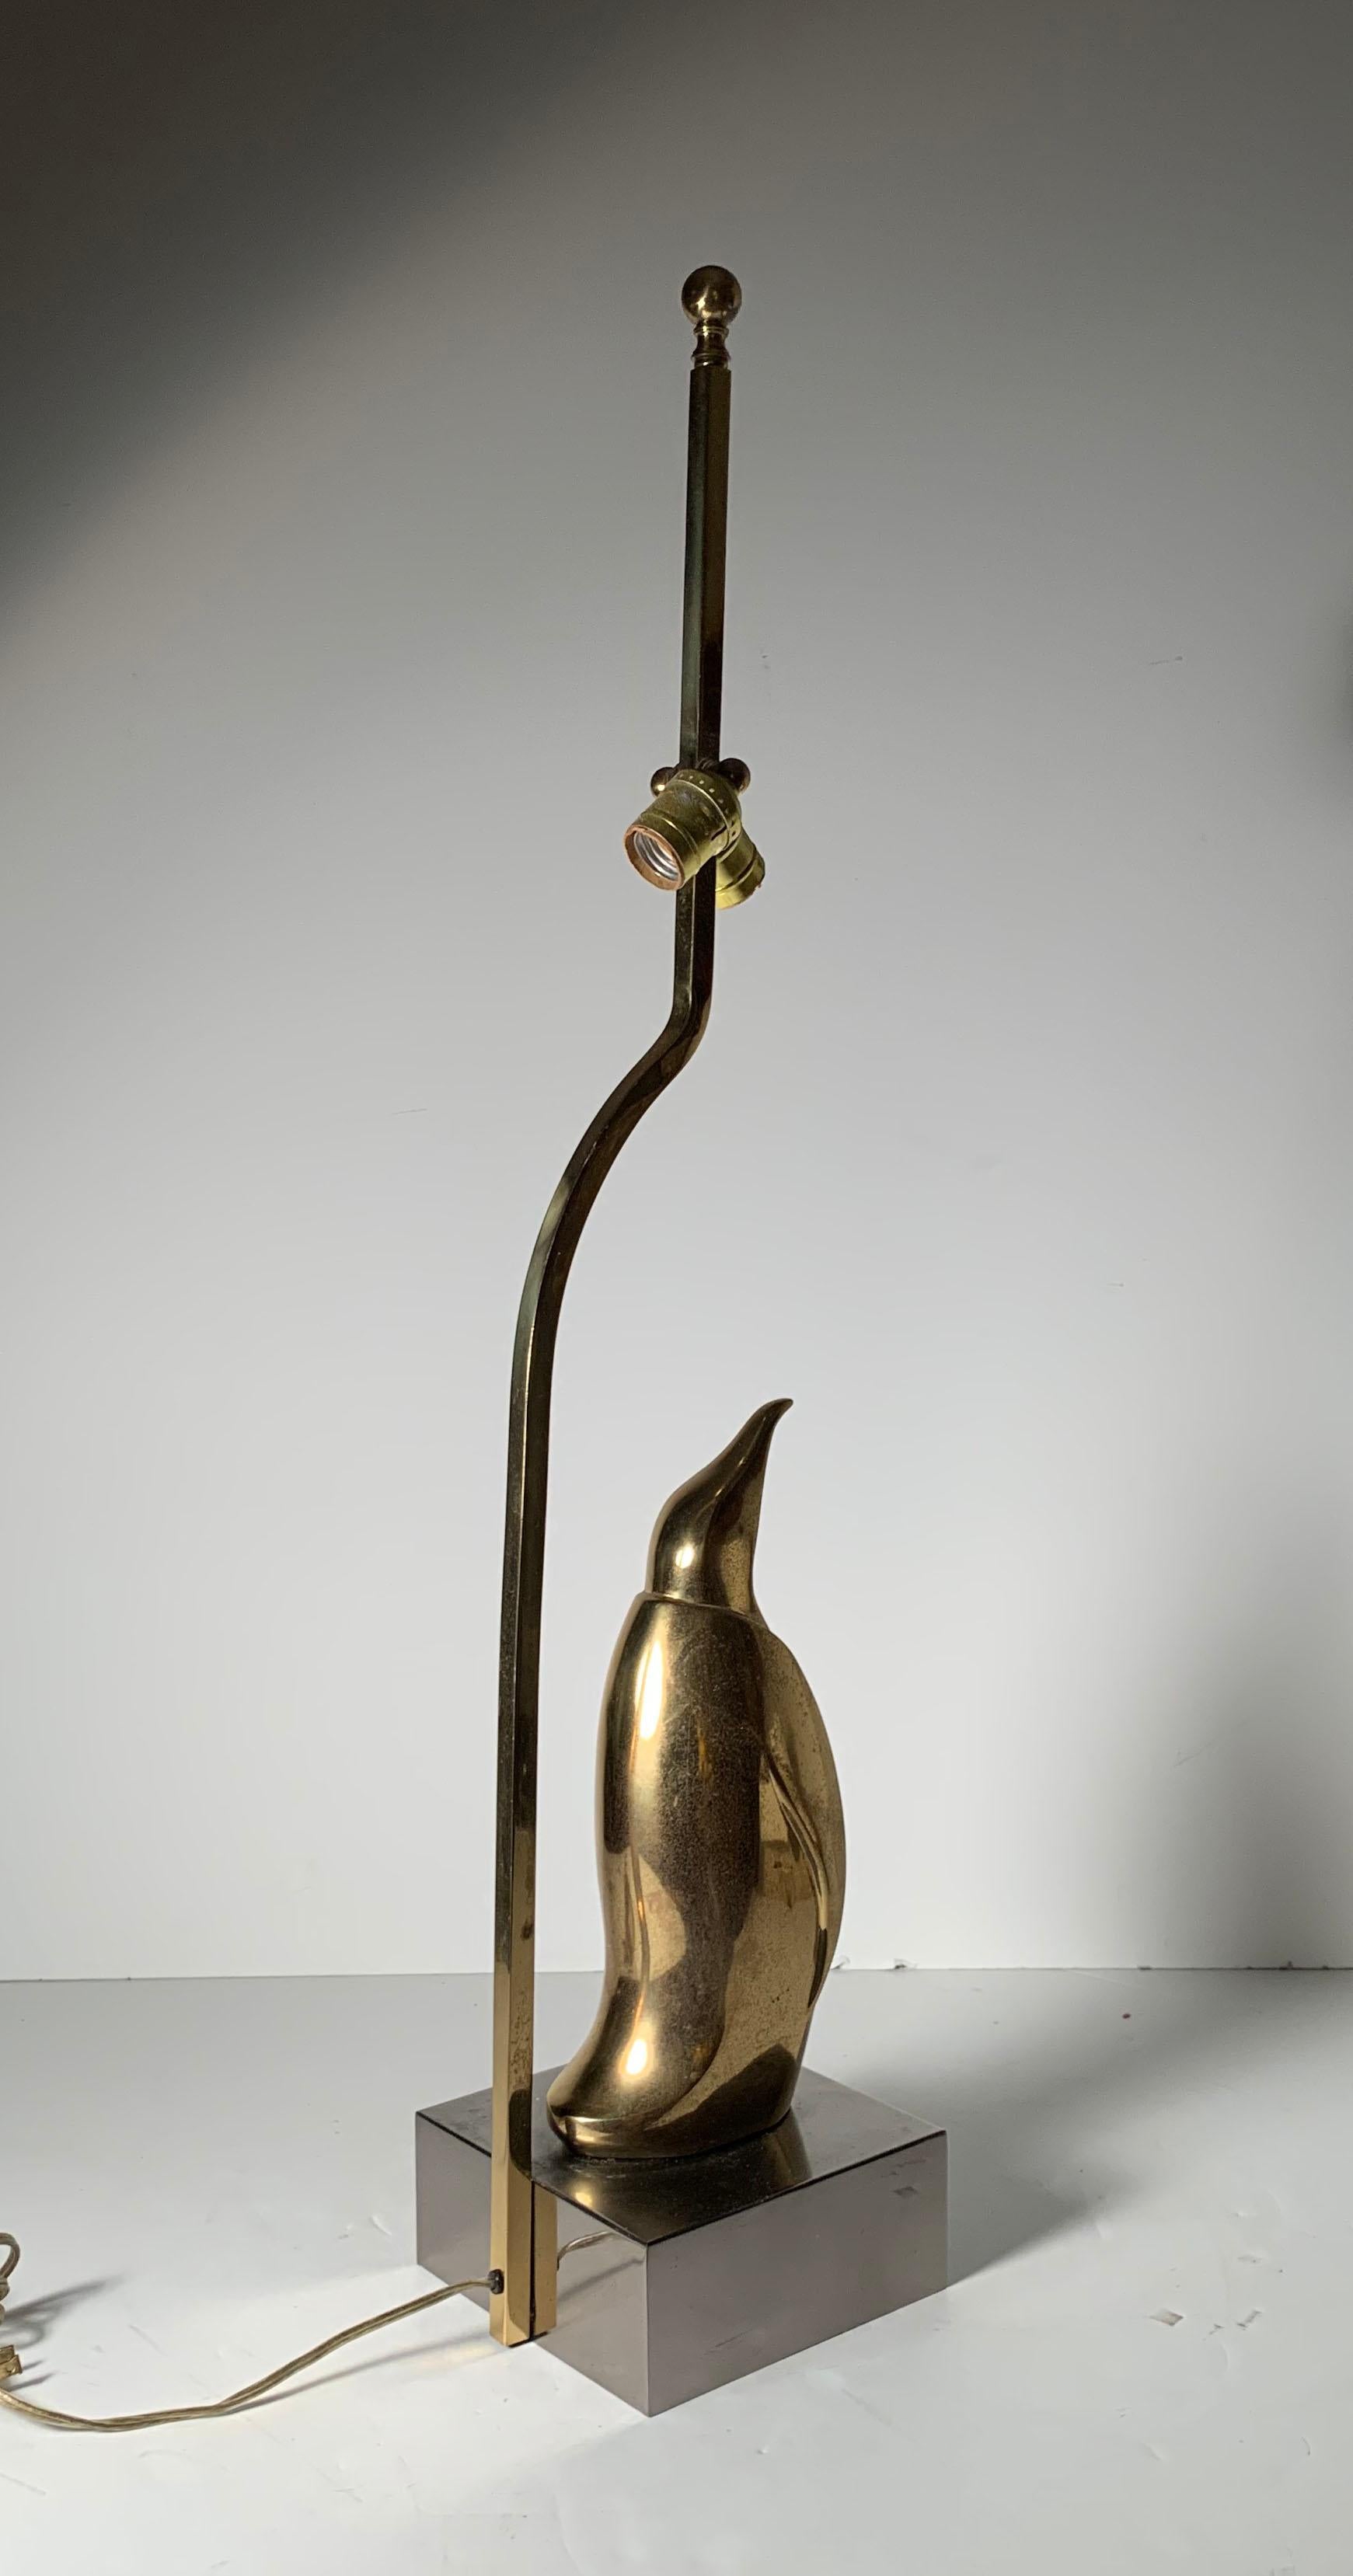 Vintage 1970s Brass Penguin Lamp Attributed to Willy Daro For Sale 2